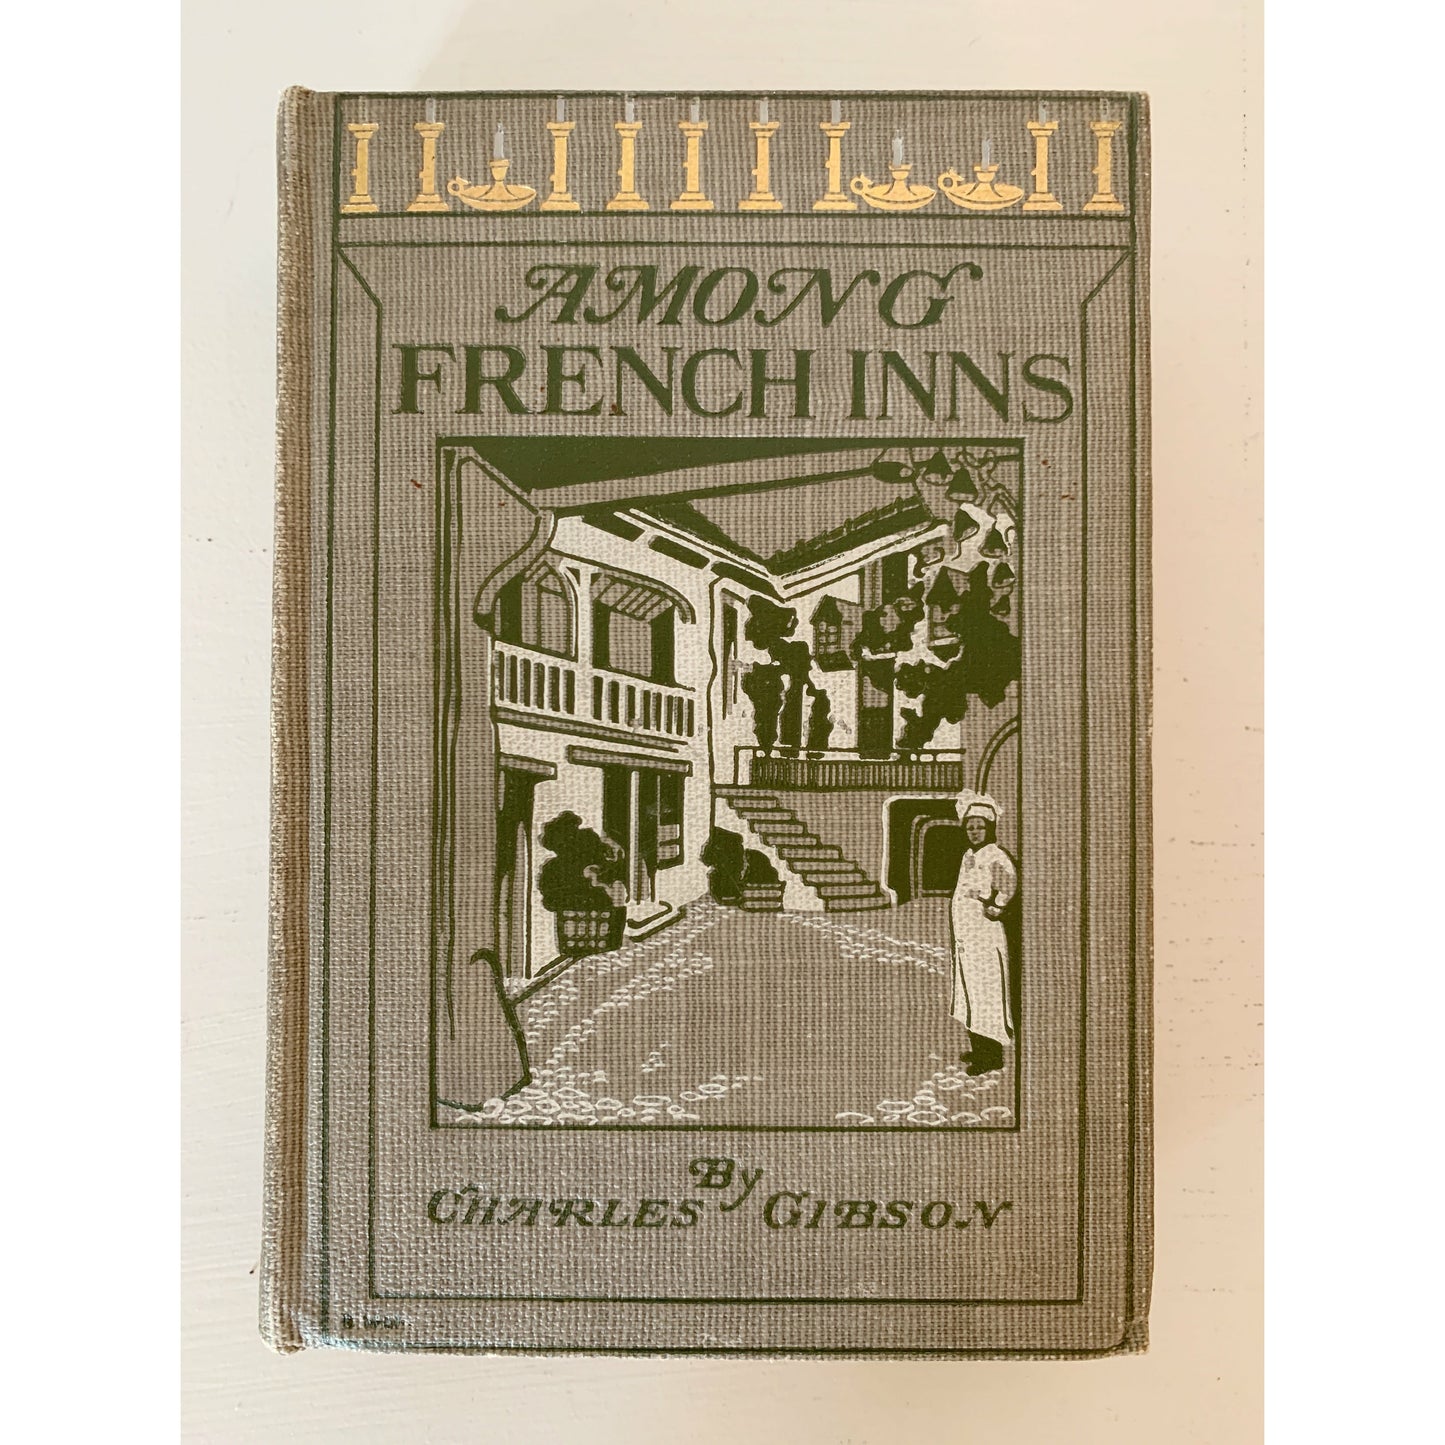 Among French Inns - First Edition - 1906 - Hardcover